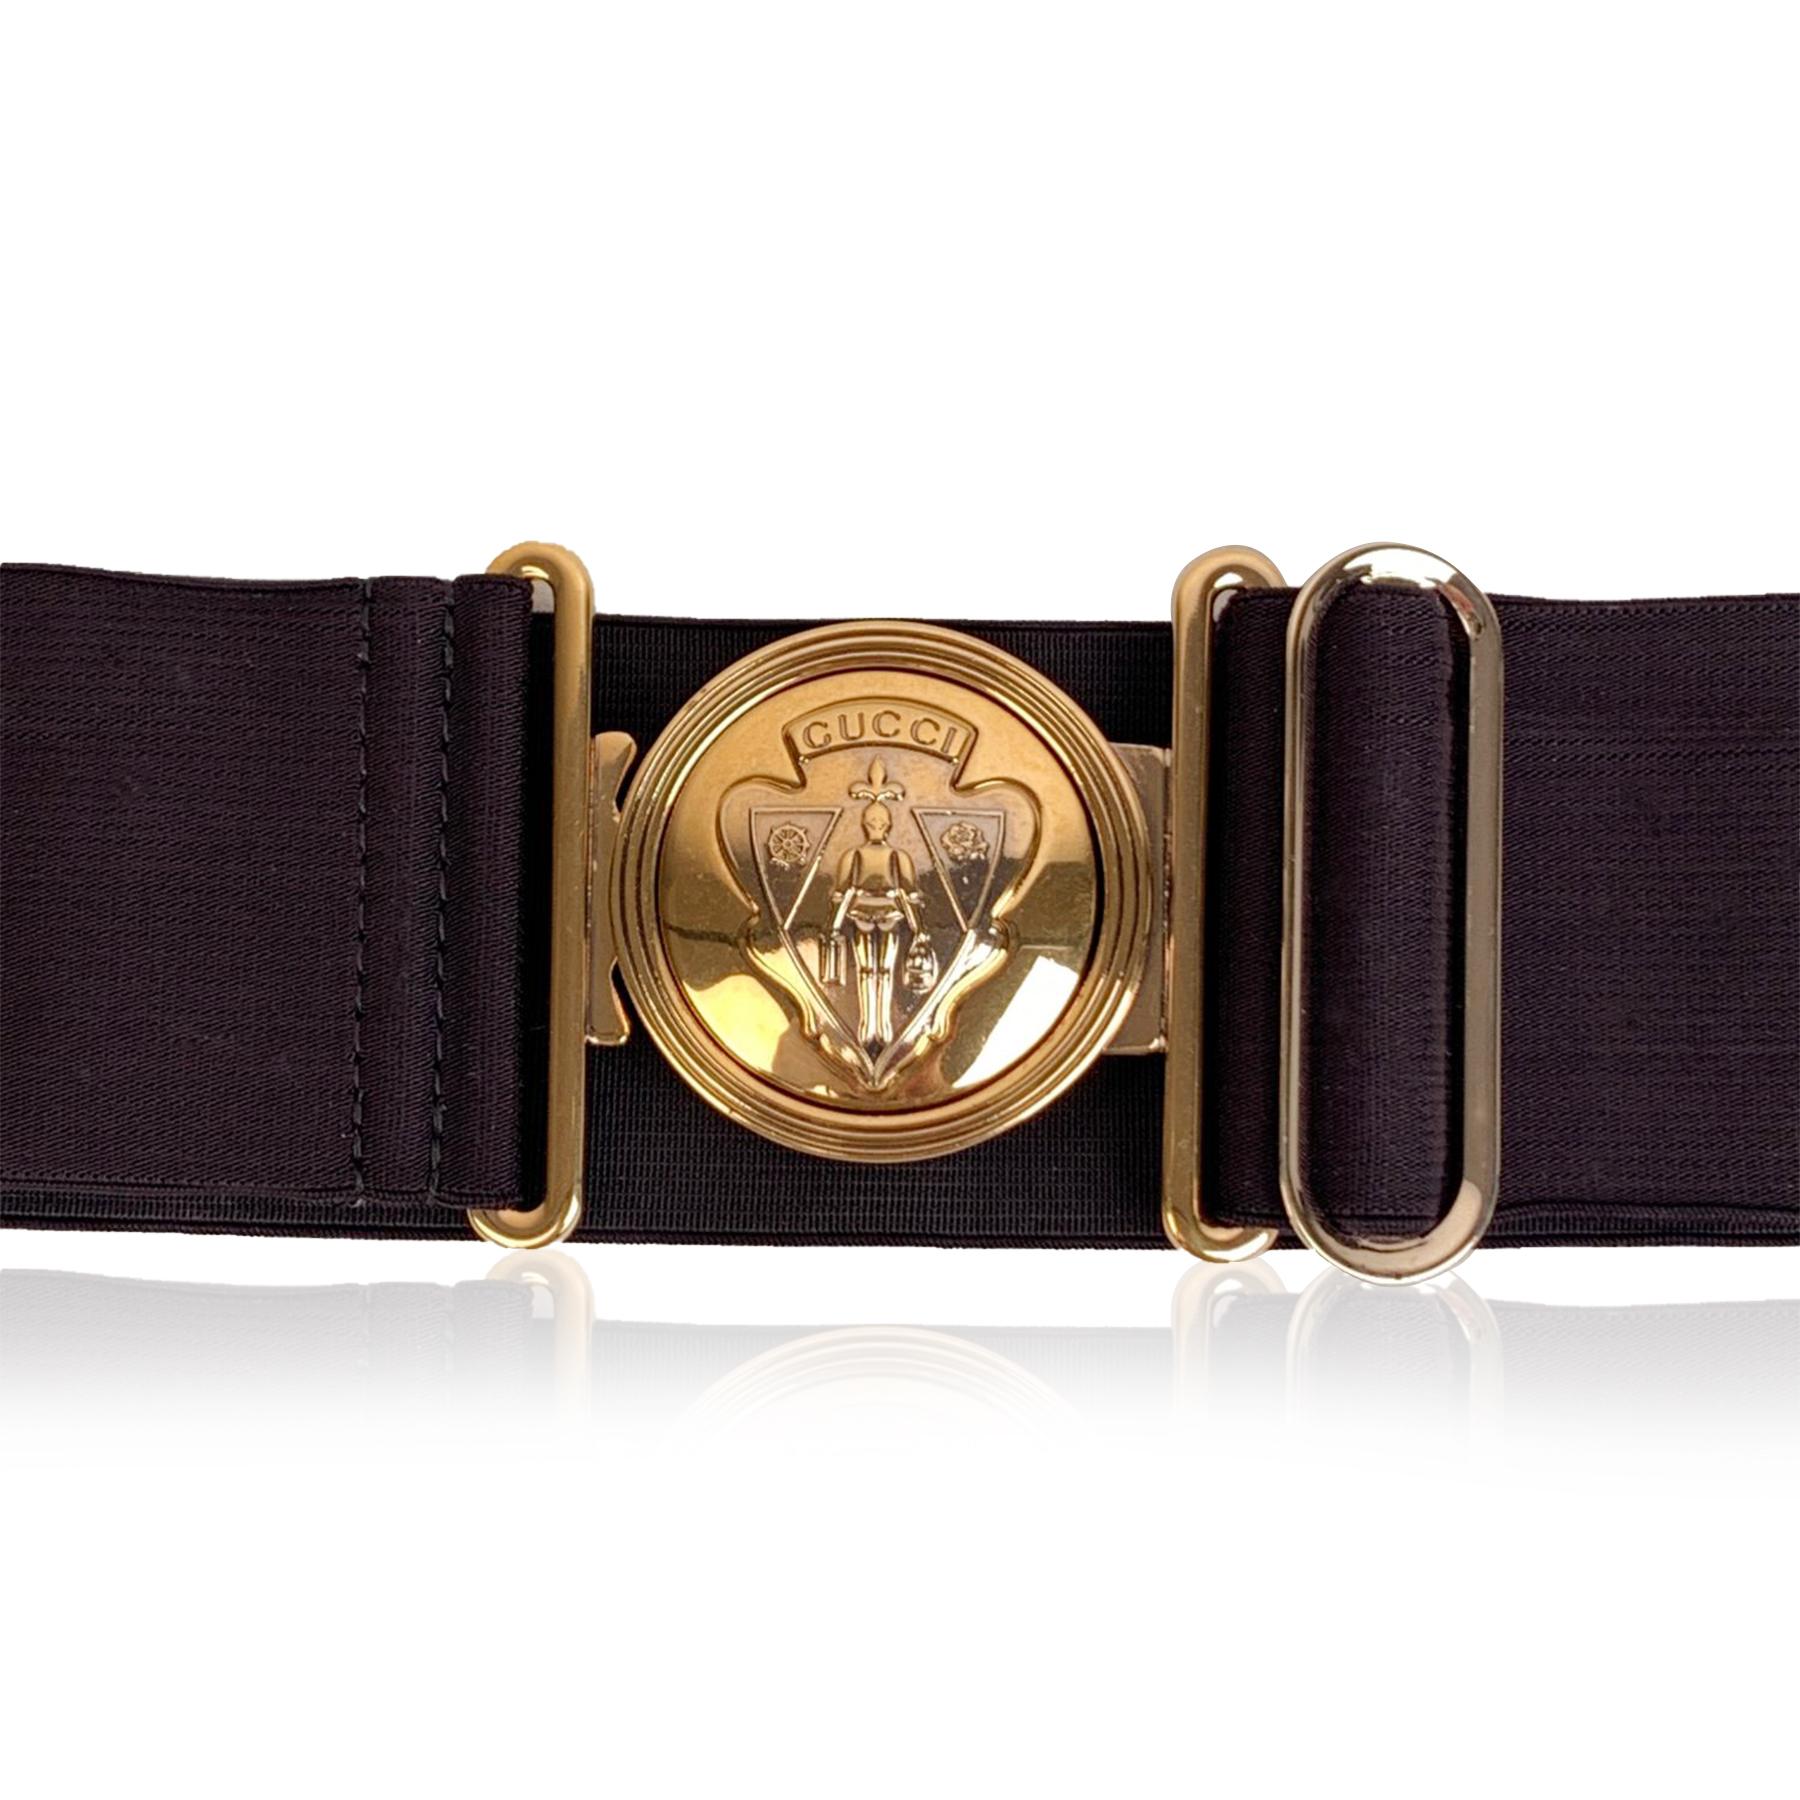 Gucci black 'Hysteria' elastic stretch belt, mod. 136124. It features gold metal round Gucci Crest buckle. Width: 2.25 inches - 5,7 cm. 'GUCCI - Made in Italy' tag on the reverse of the belt, serial number engraved on the reverse of the belt. Size: